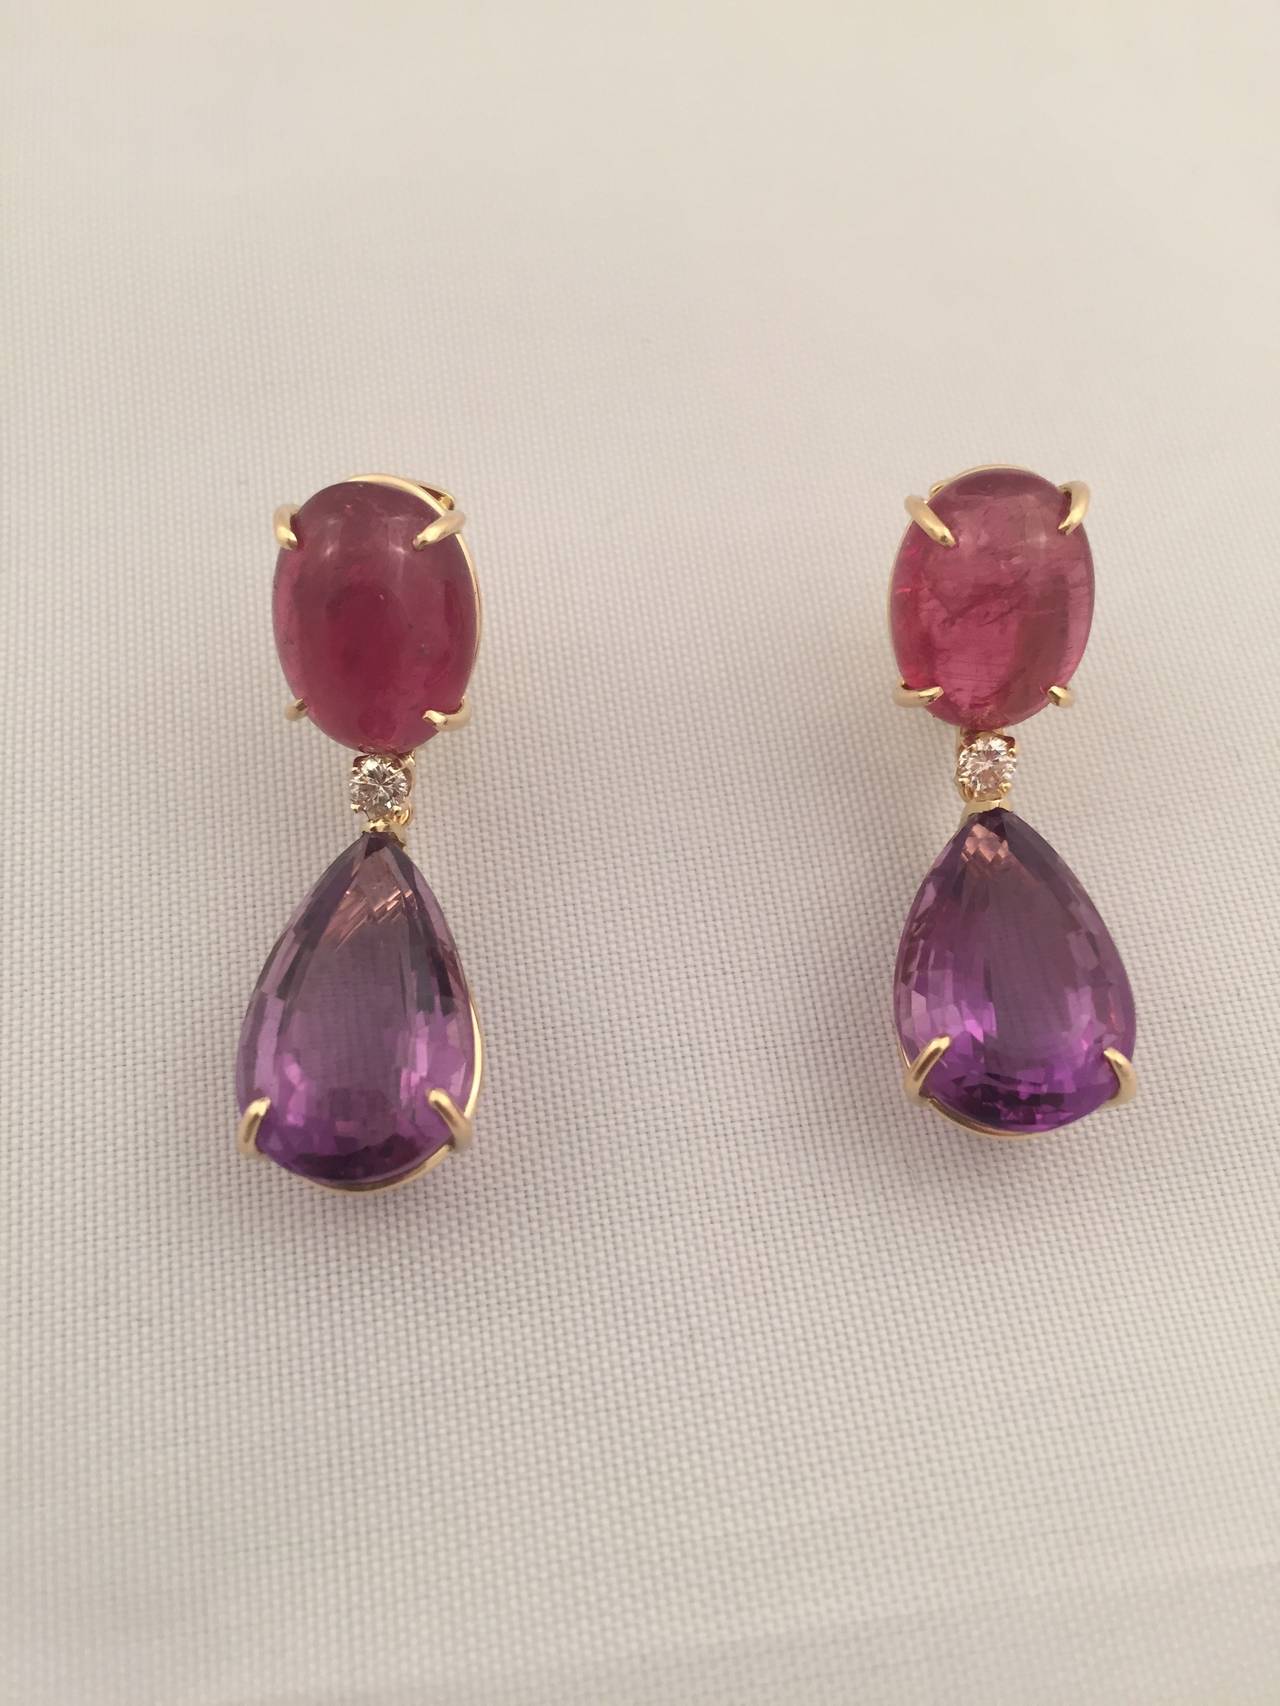 18kt Yellow Gold Drop earring with Oval Cabochon Rubelite and faceted pear shaped drop Amethyst Drop with center Diamond detail ~.30cts.
Rich color combination and Elegant Drop to complement any Face shape!

The earring measures ~ 1 1/2